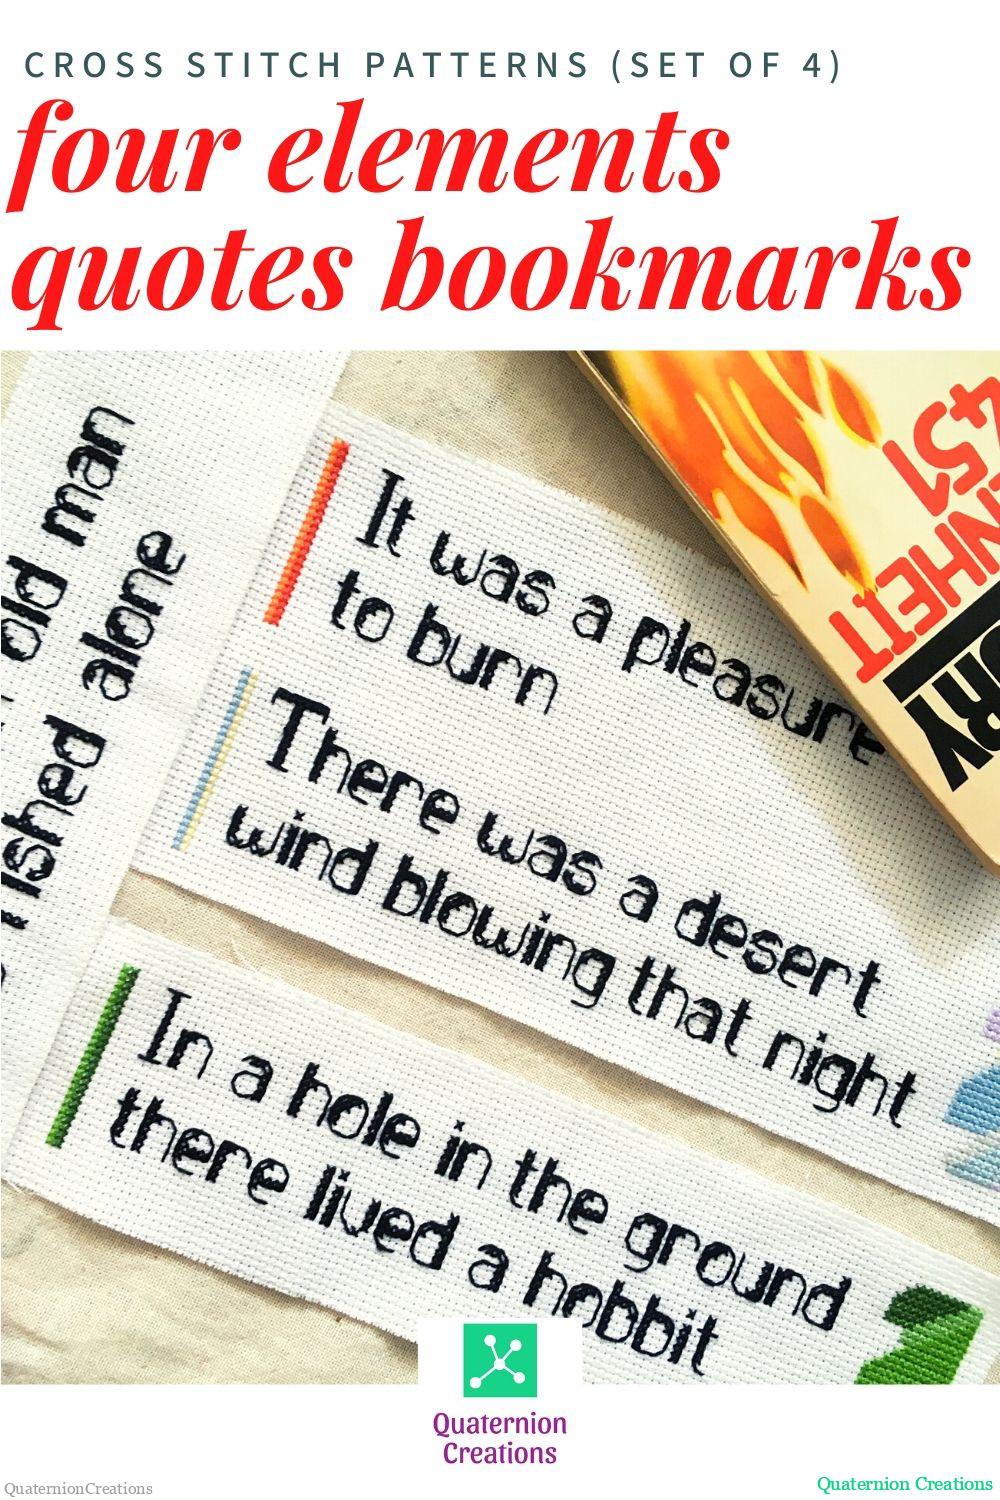 Quote bookmarks modern cross stitch patterns set of four, four elements cross stitch